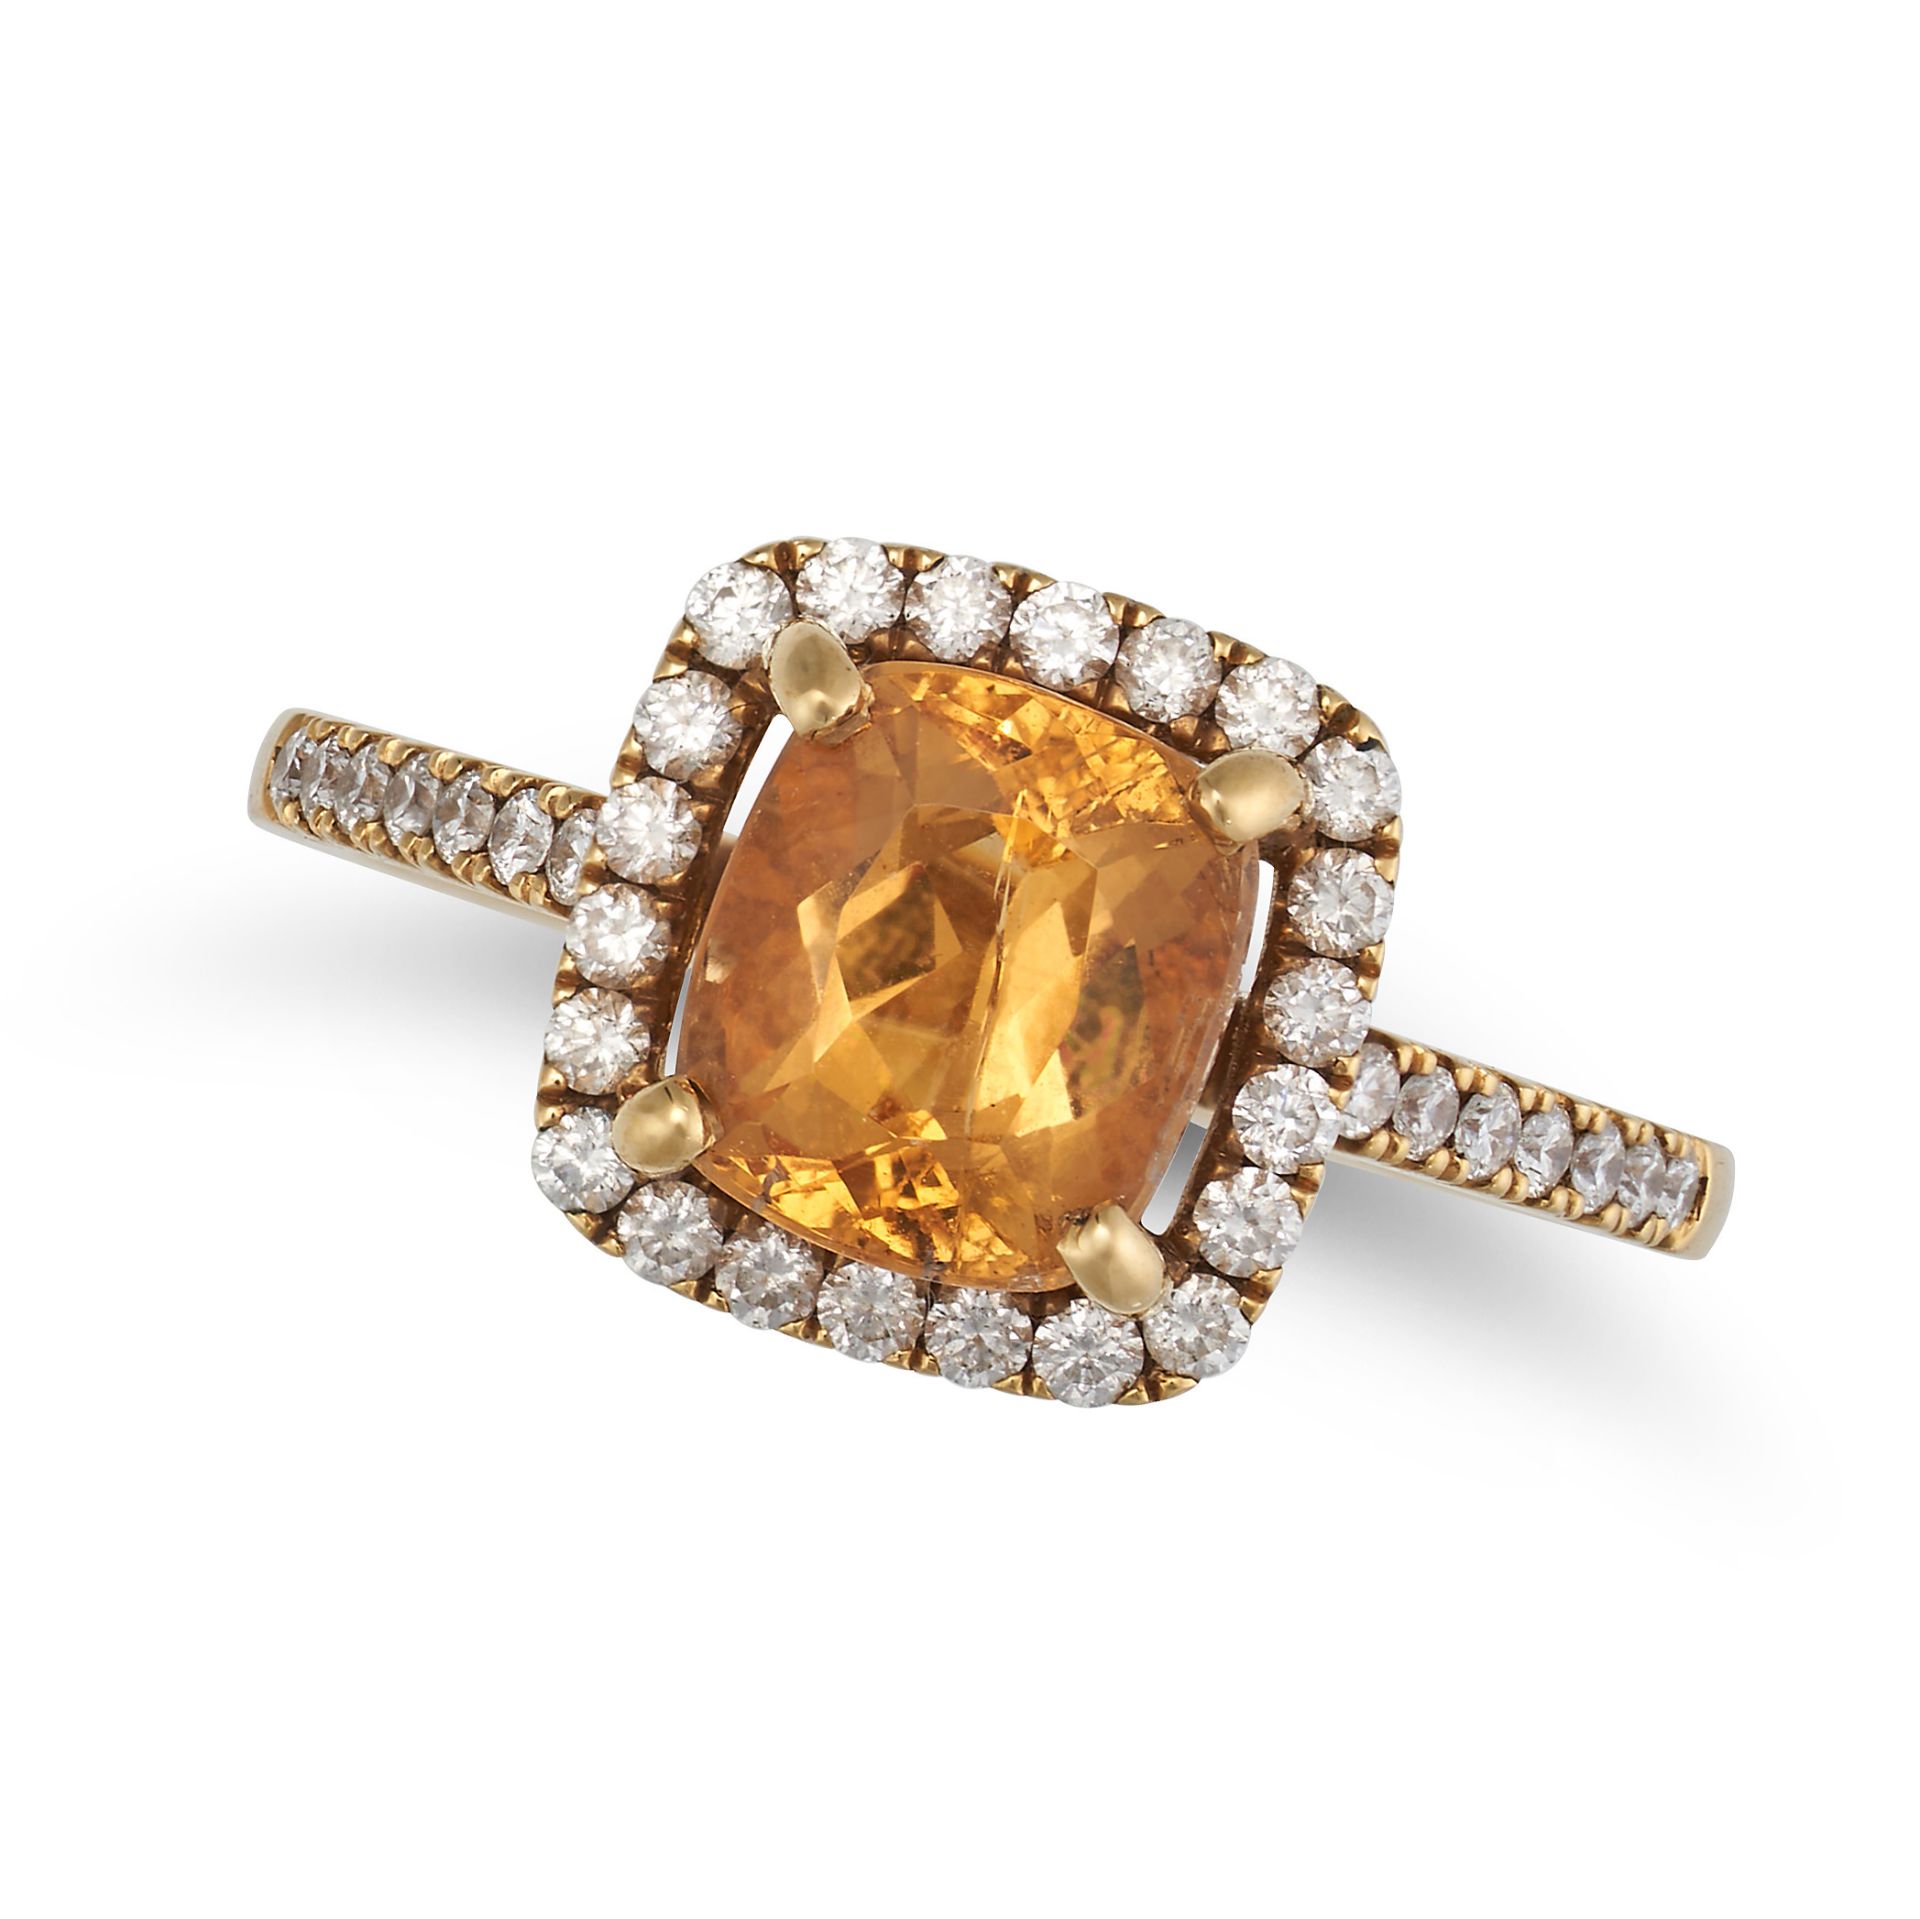 NO RESERVE - A YELLOW TOPAZ AND DIAMOND HALO RING in 18ct yellow gold, set with a cushion cut top...